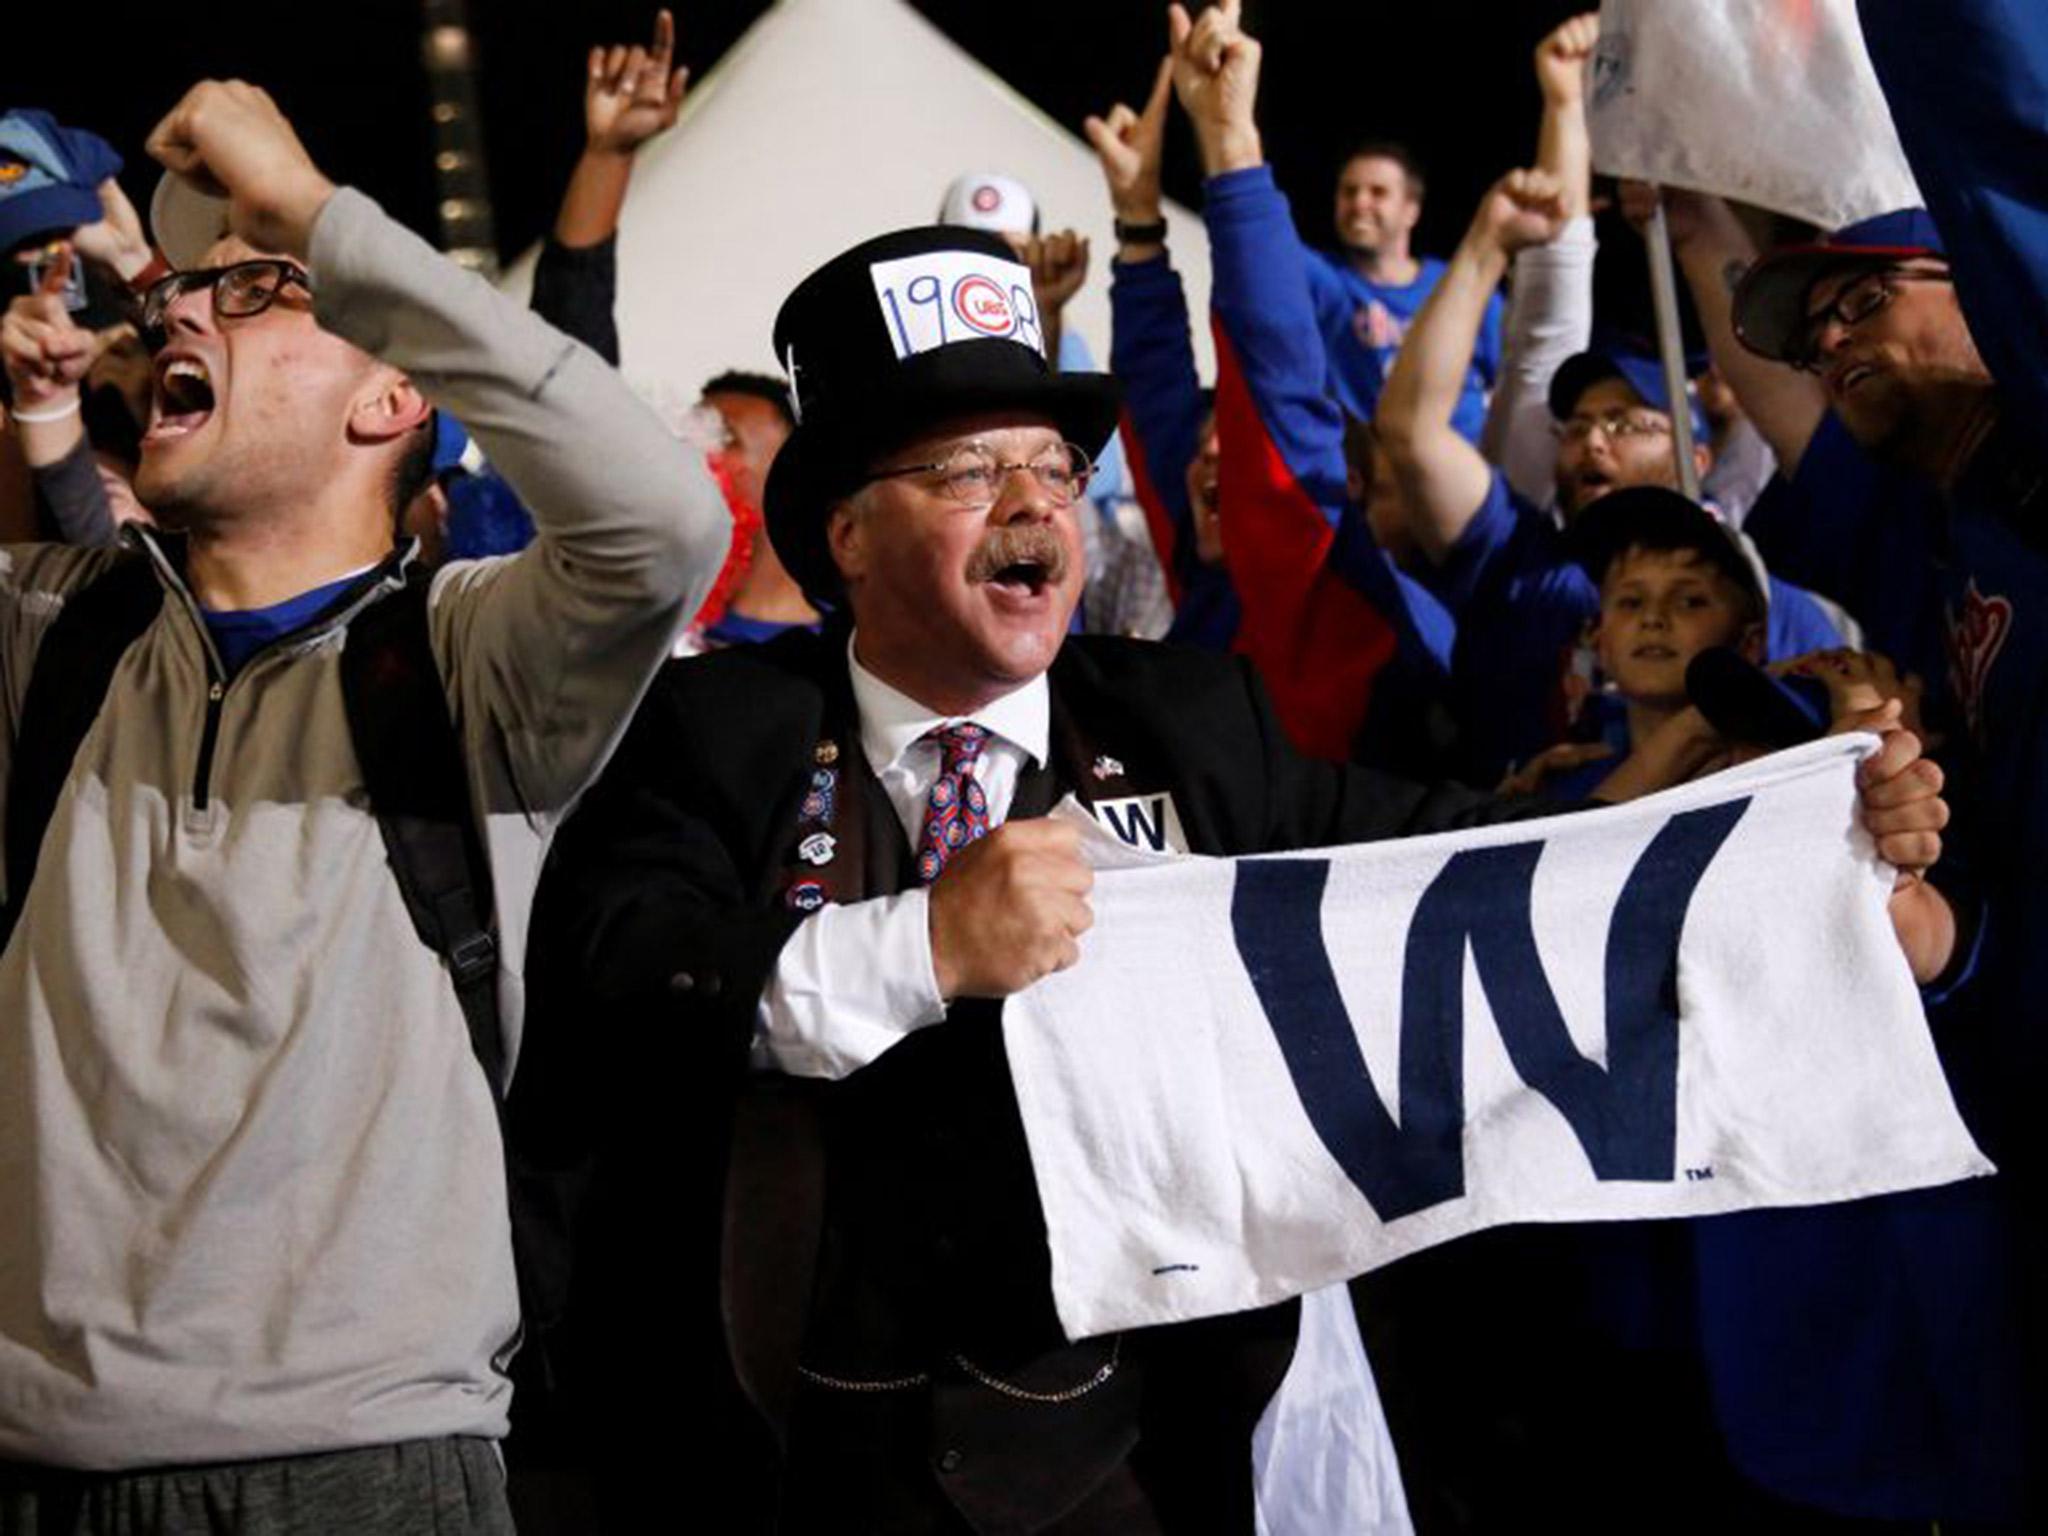 Chicago Cubs supporters have posted videos on social media of elderly fans celebrating the World Series triumph